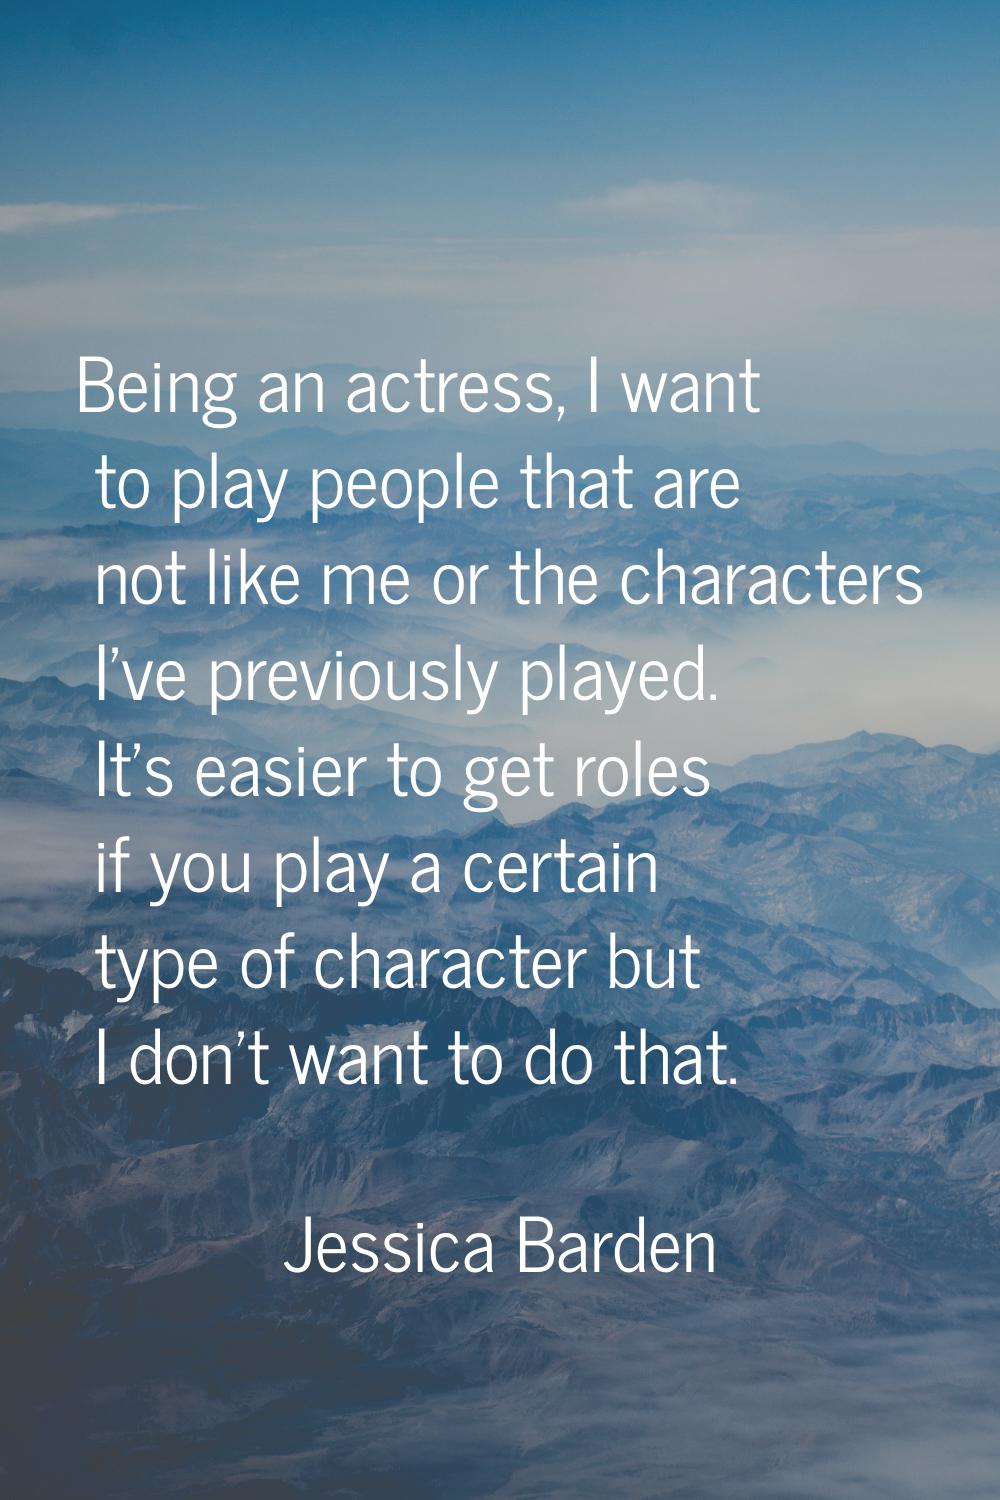 Being an actress, I want to play people that are not like me or the characters I’ve previously play